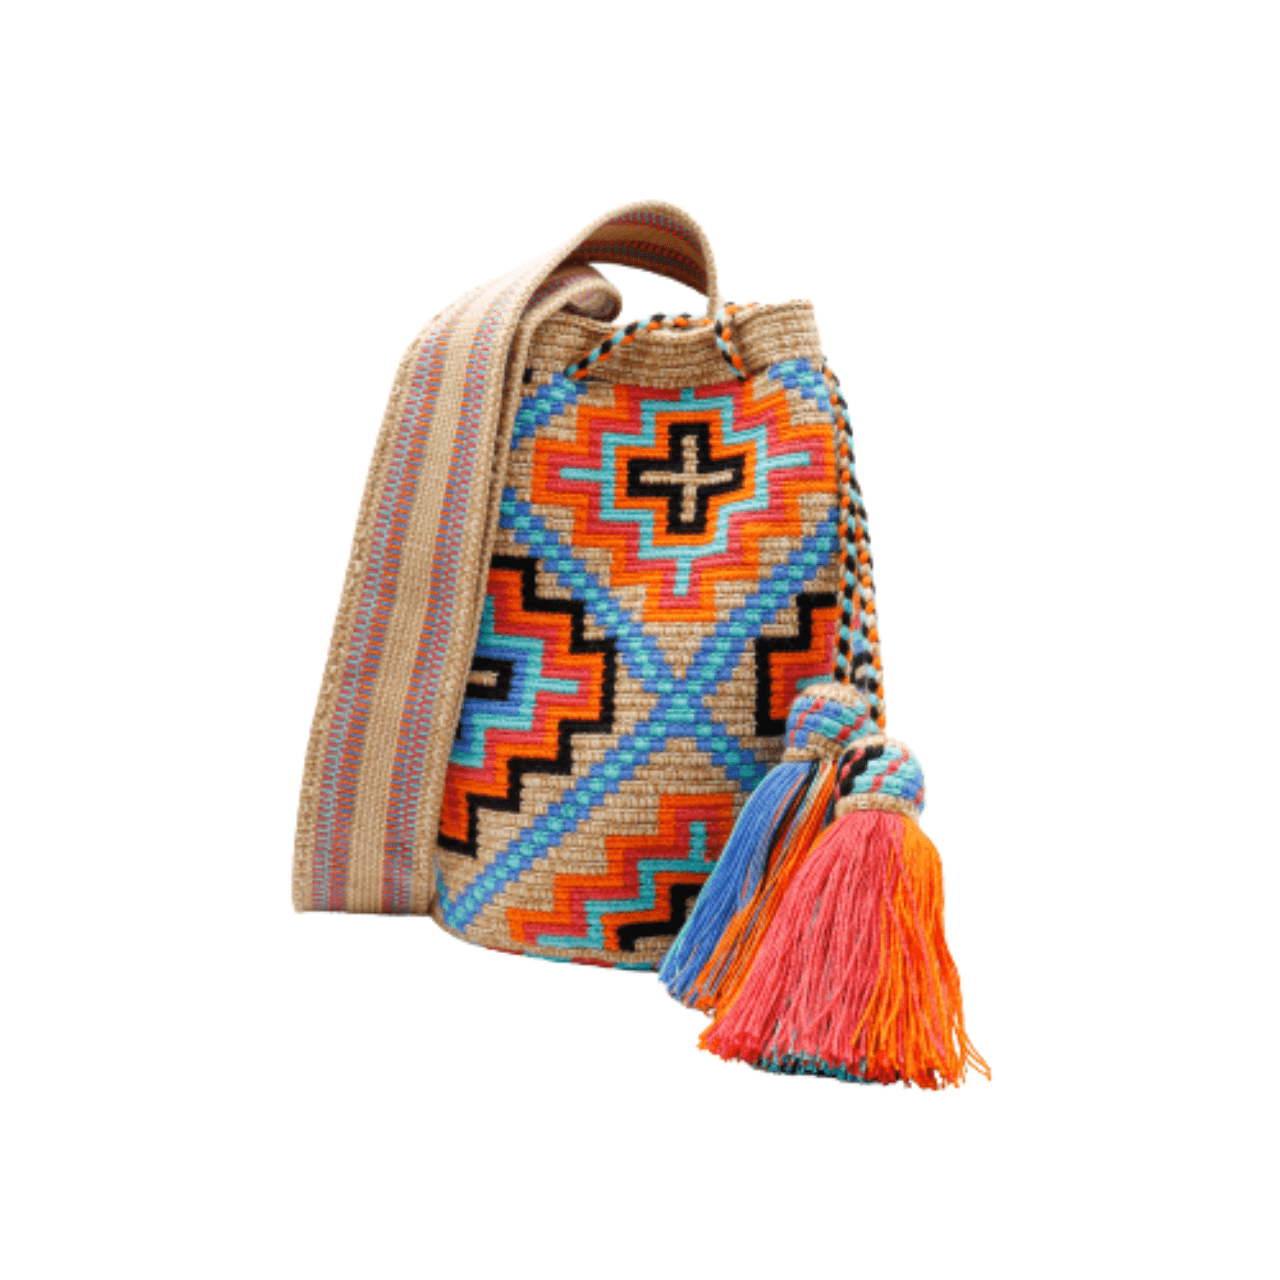 Clover Wayuu Bag in Warm Colors - Handmade Artisan Craftsmanship - Unique Piece of Art Symbolizing Strength, Love, and Commitment